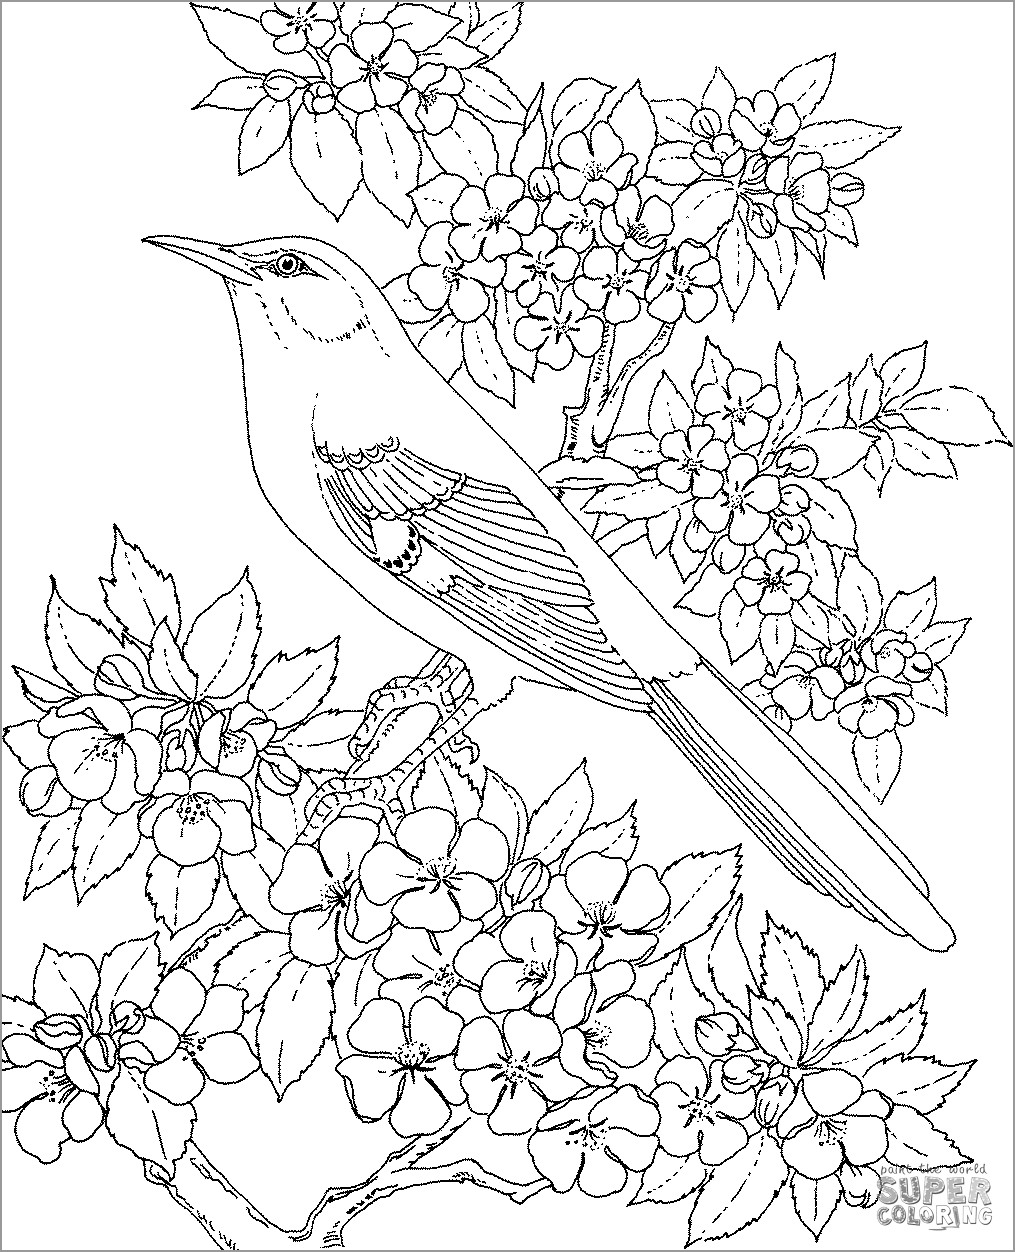 Mockingbird Coloring Page for Adults